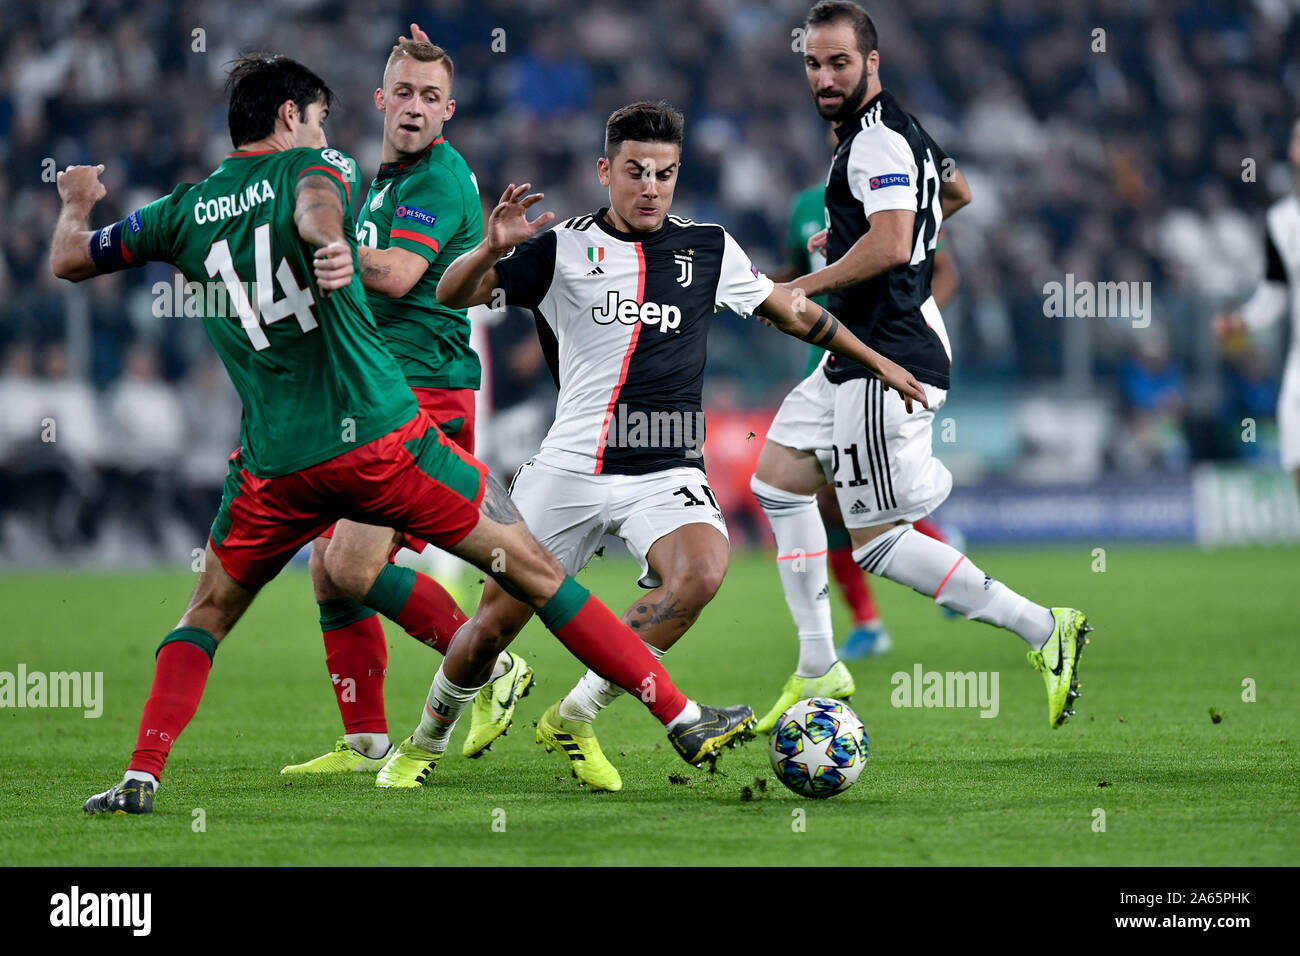 Turin, Italy. 22nd Oct, 2019. Paulo Dybala of Juventus lis challenged by Vedran Corluka of Lokomotiv Moscow during the UEFA Champions League group stage match between Juventus and Lokomotiv Moscow at the Juventus Stadium, Turin, Italy on 22 October 2019. Photo by Giuseppe Maffia. Credit: UK Sports Pics Ltd/Alamy Live News Stock Photo